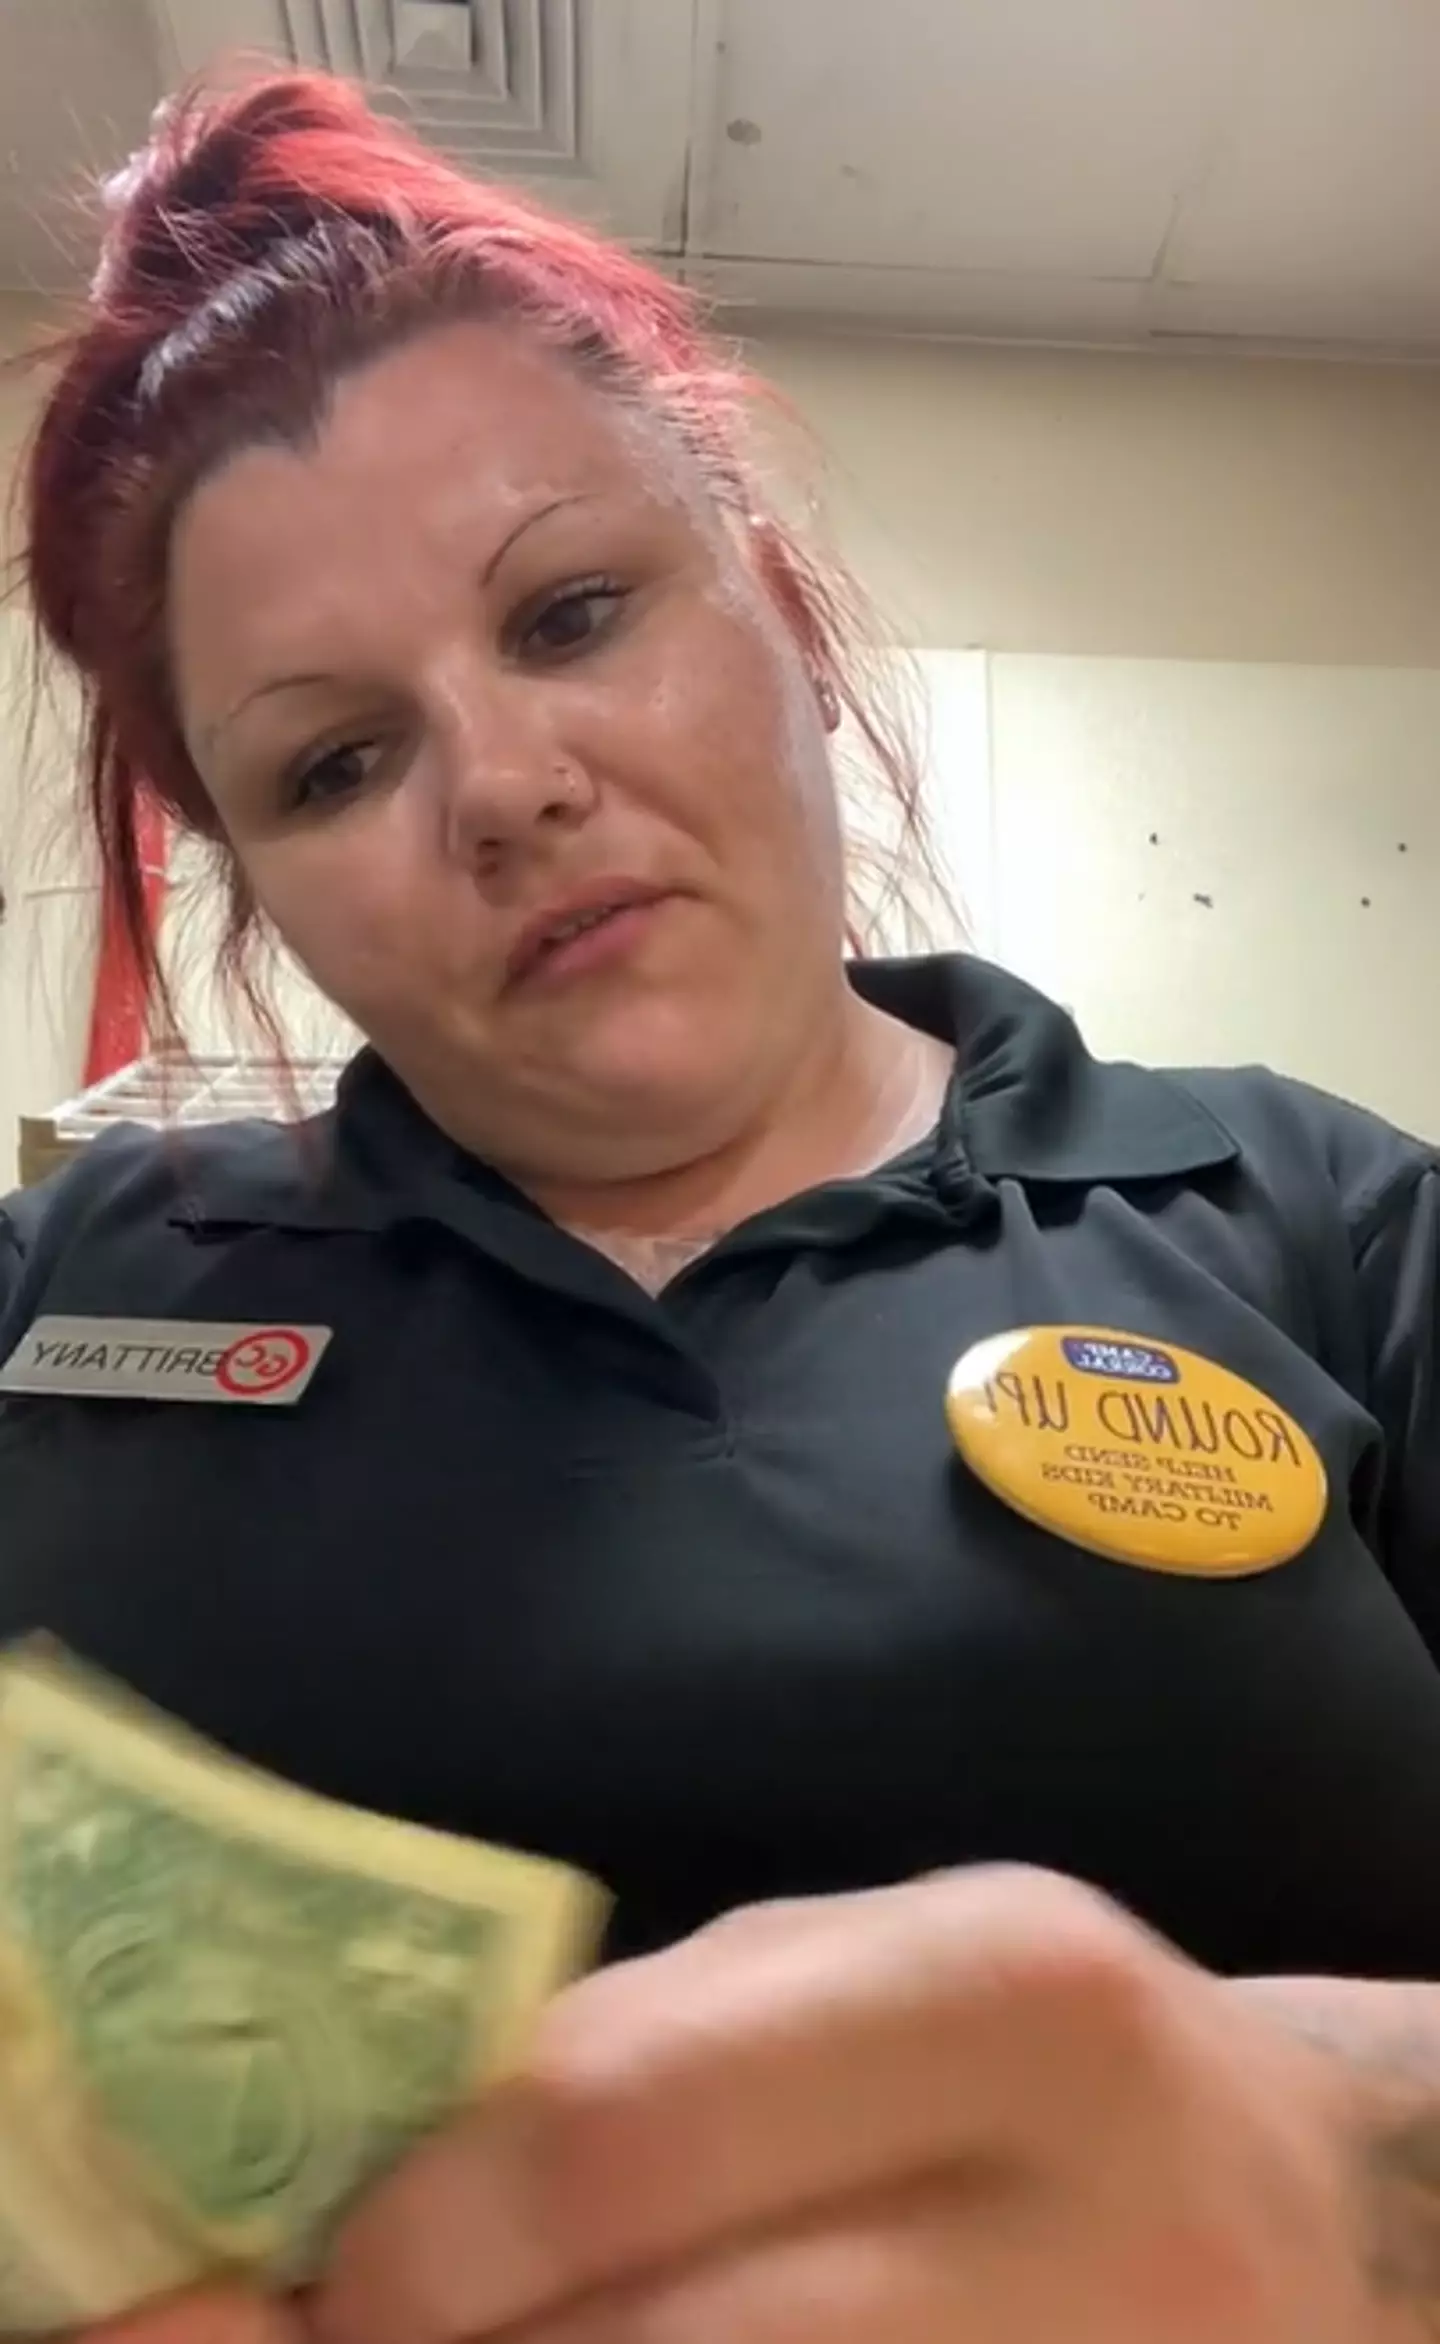 Brittany was left with only 69 dollars in tips.